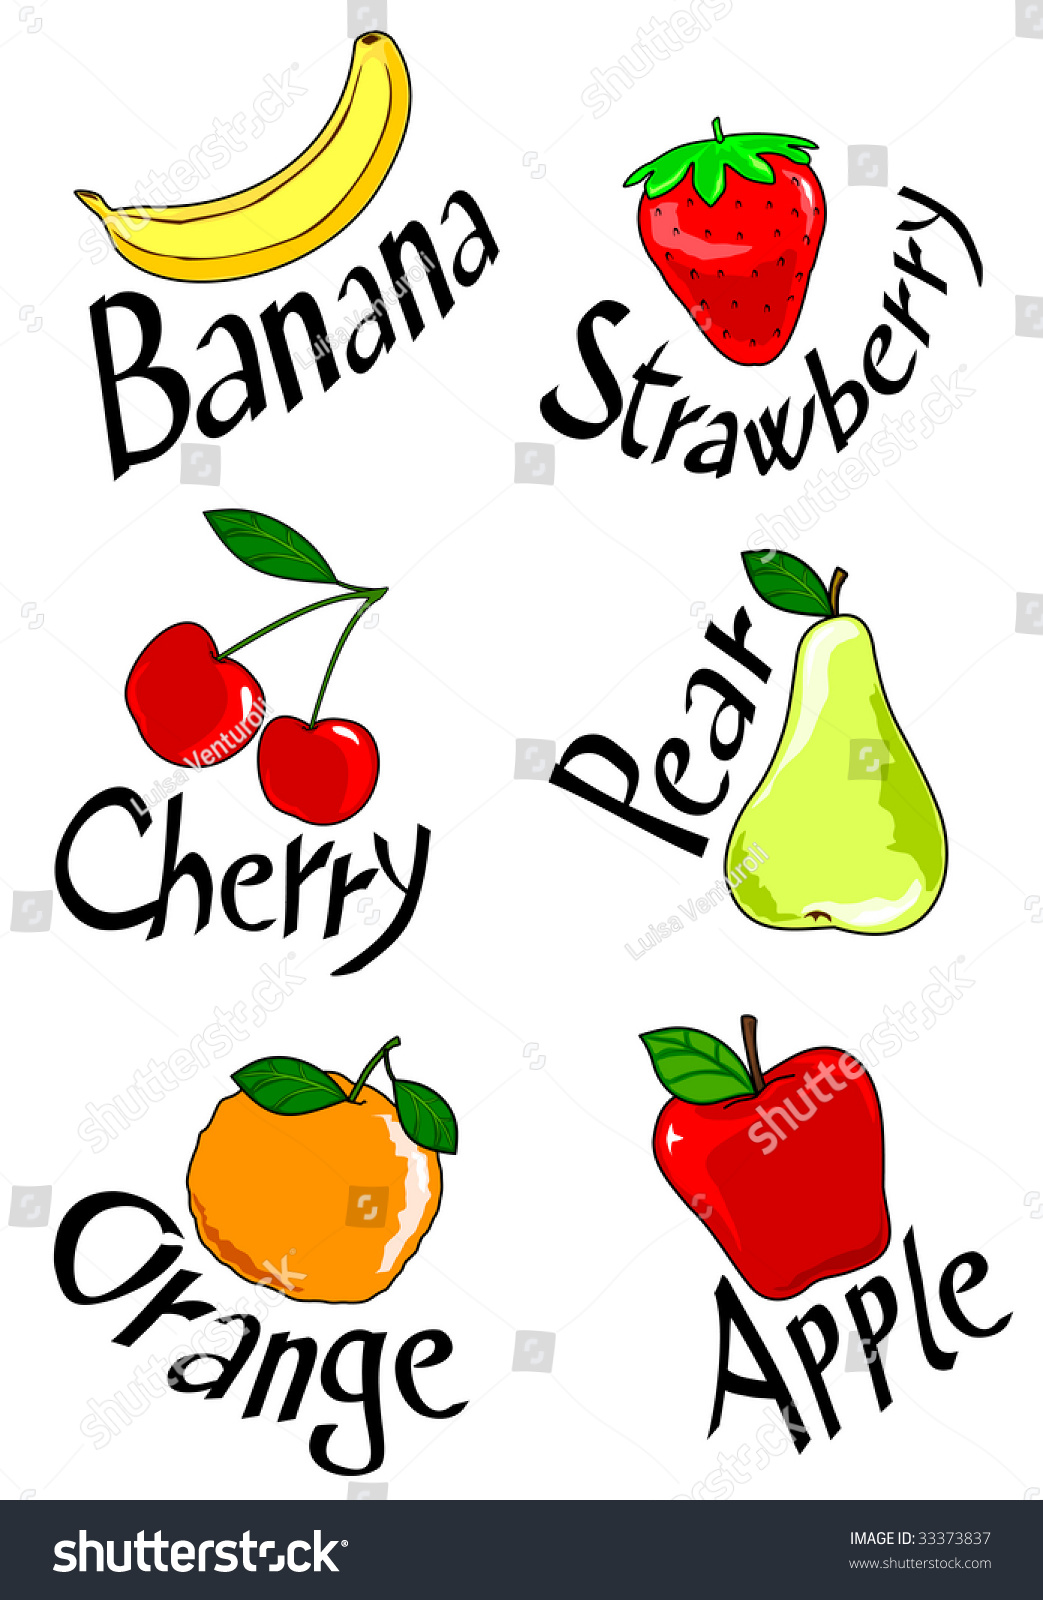 clipart of different fruits - photo #3